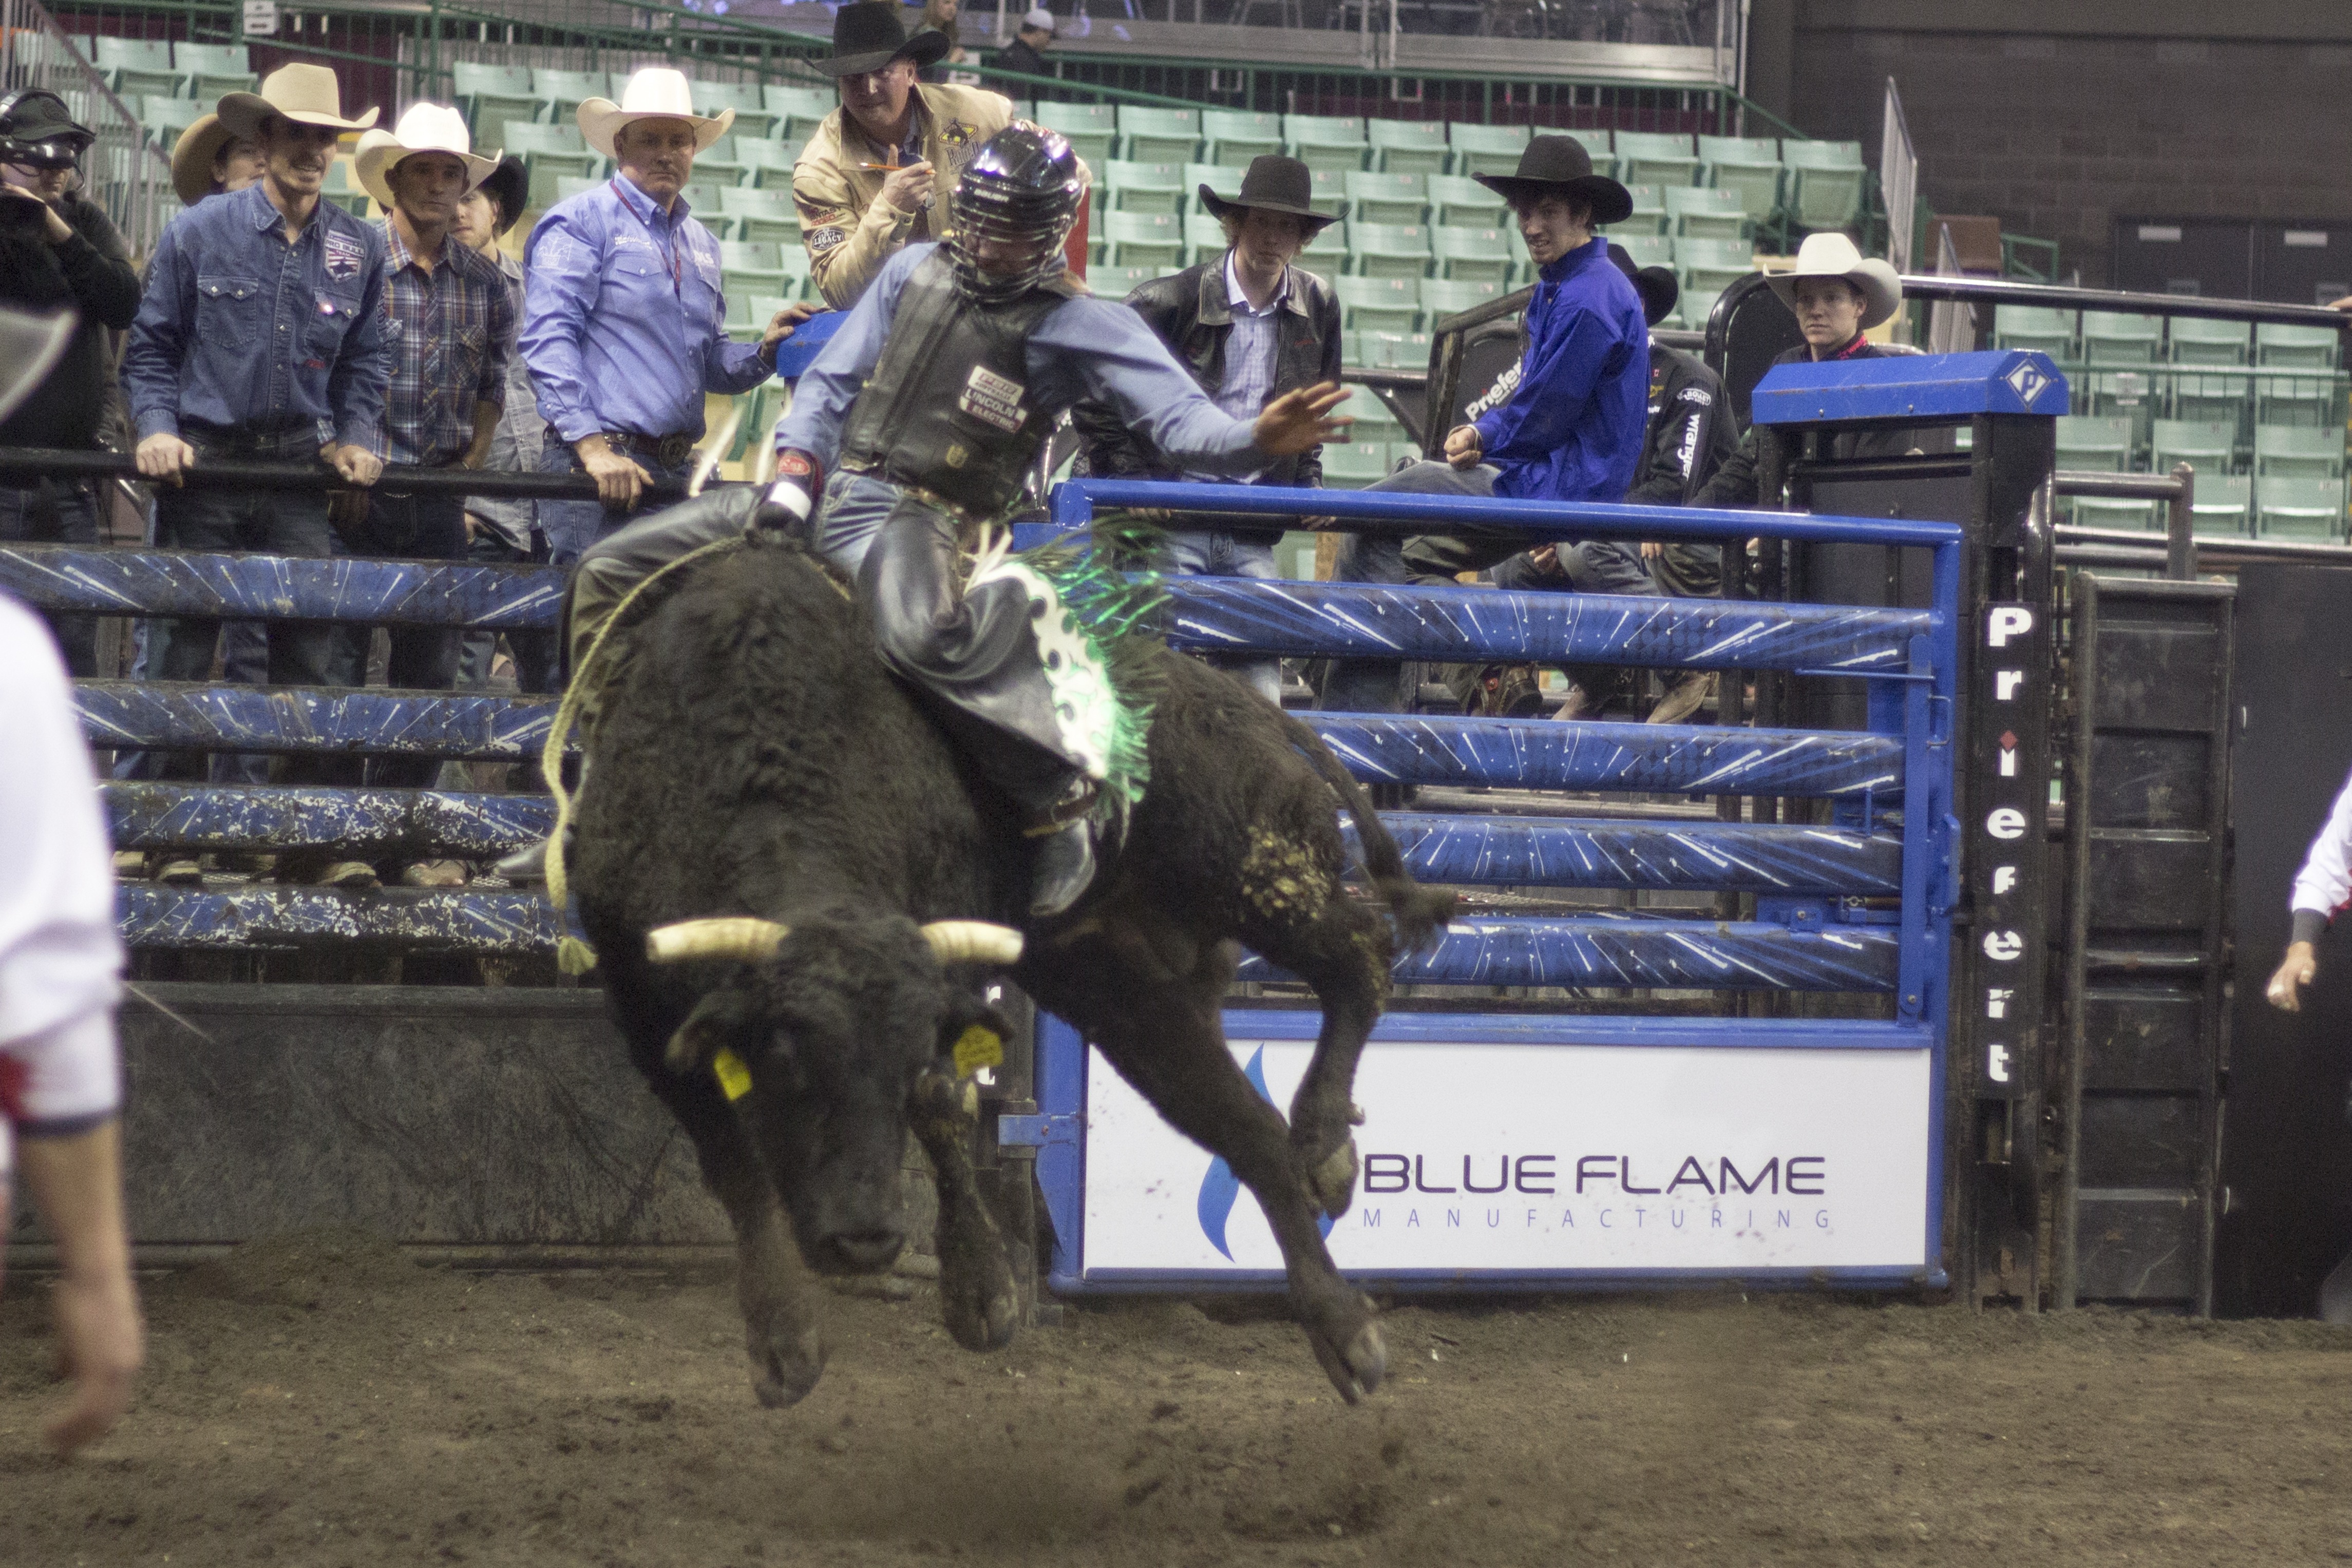 SERIOUS SKILLS – Garrett Green of the Professional Bull Riding Canada (PBR) Touring Pro managed to earn 86.5 points during the short round of the event held last weekend at the Enmax Centrium.